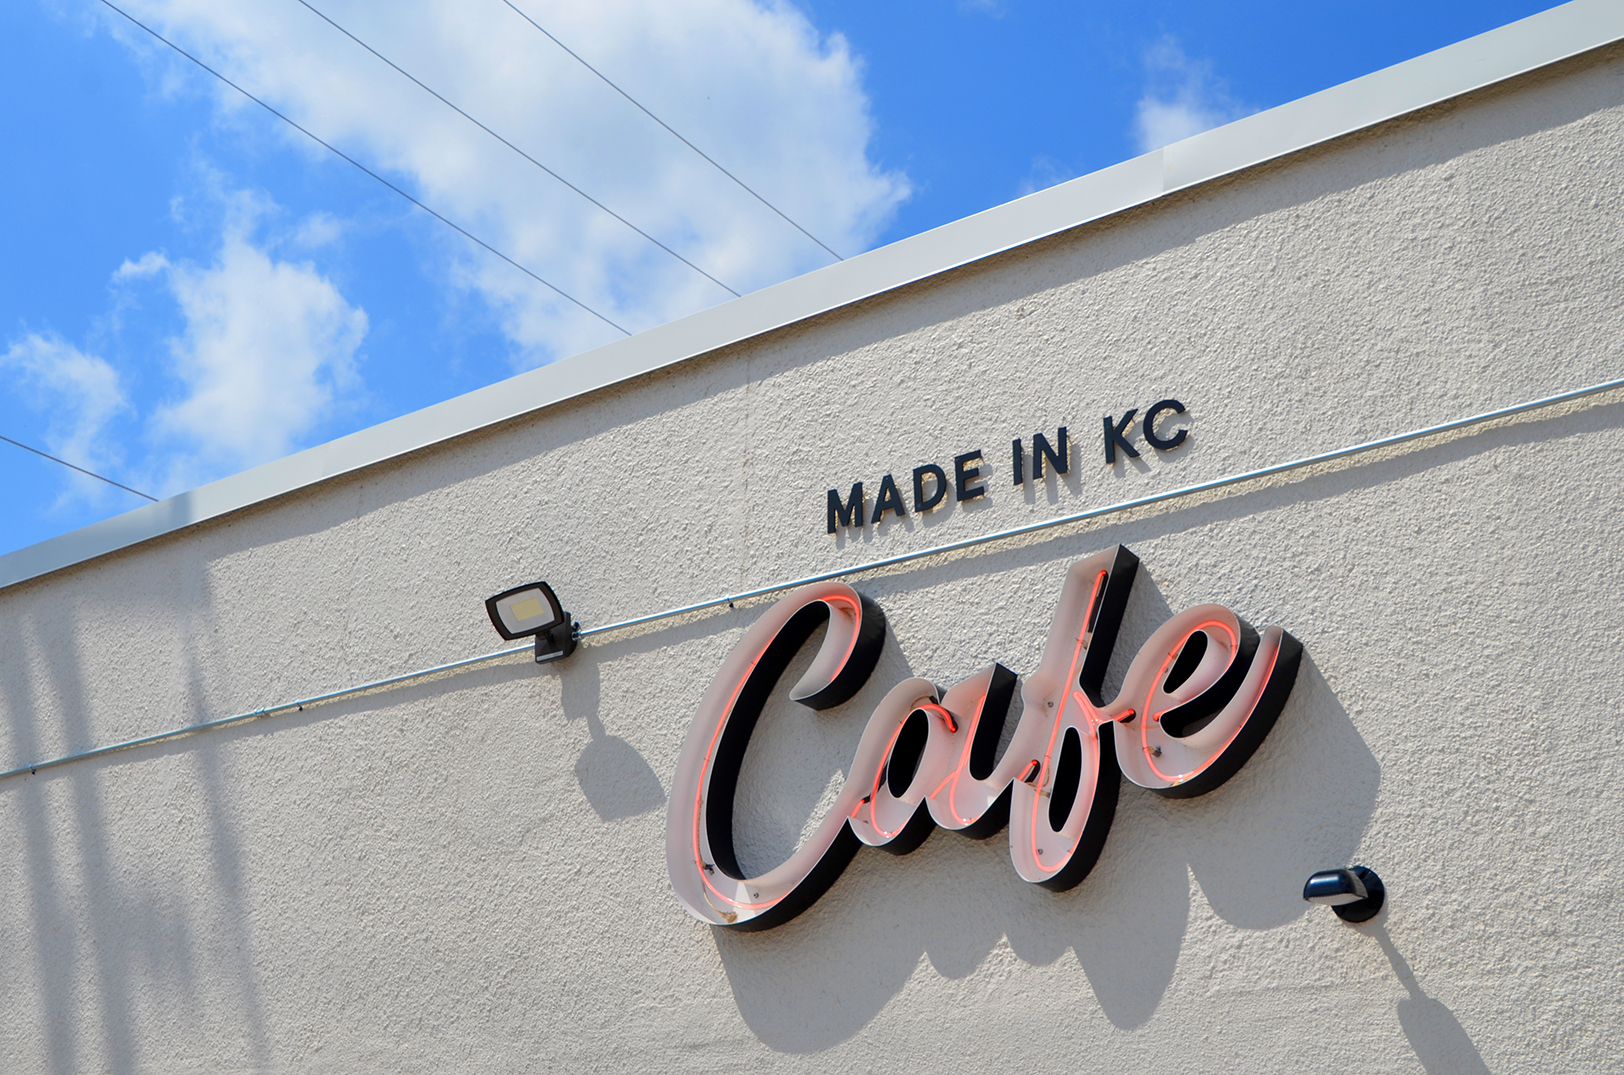 Made in KC Cafe Midtown